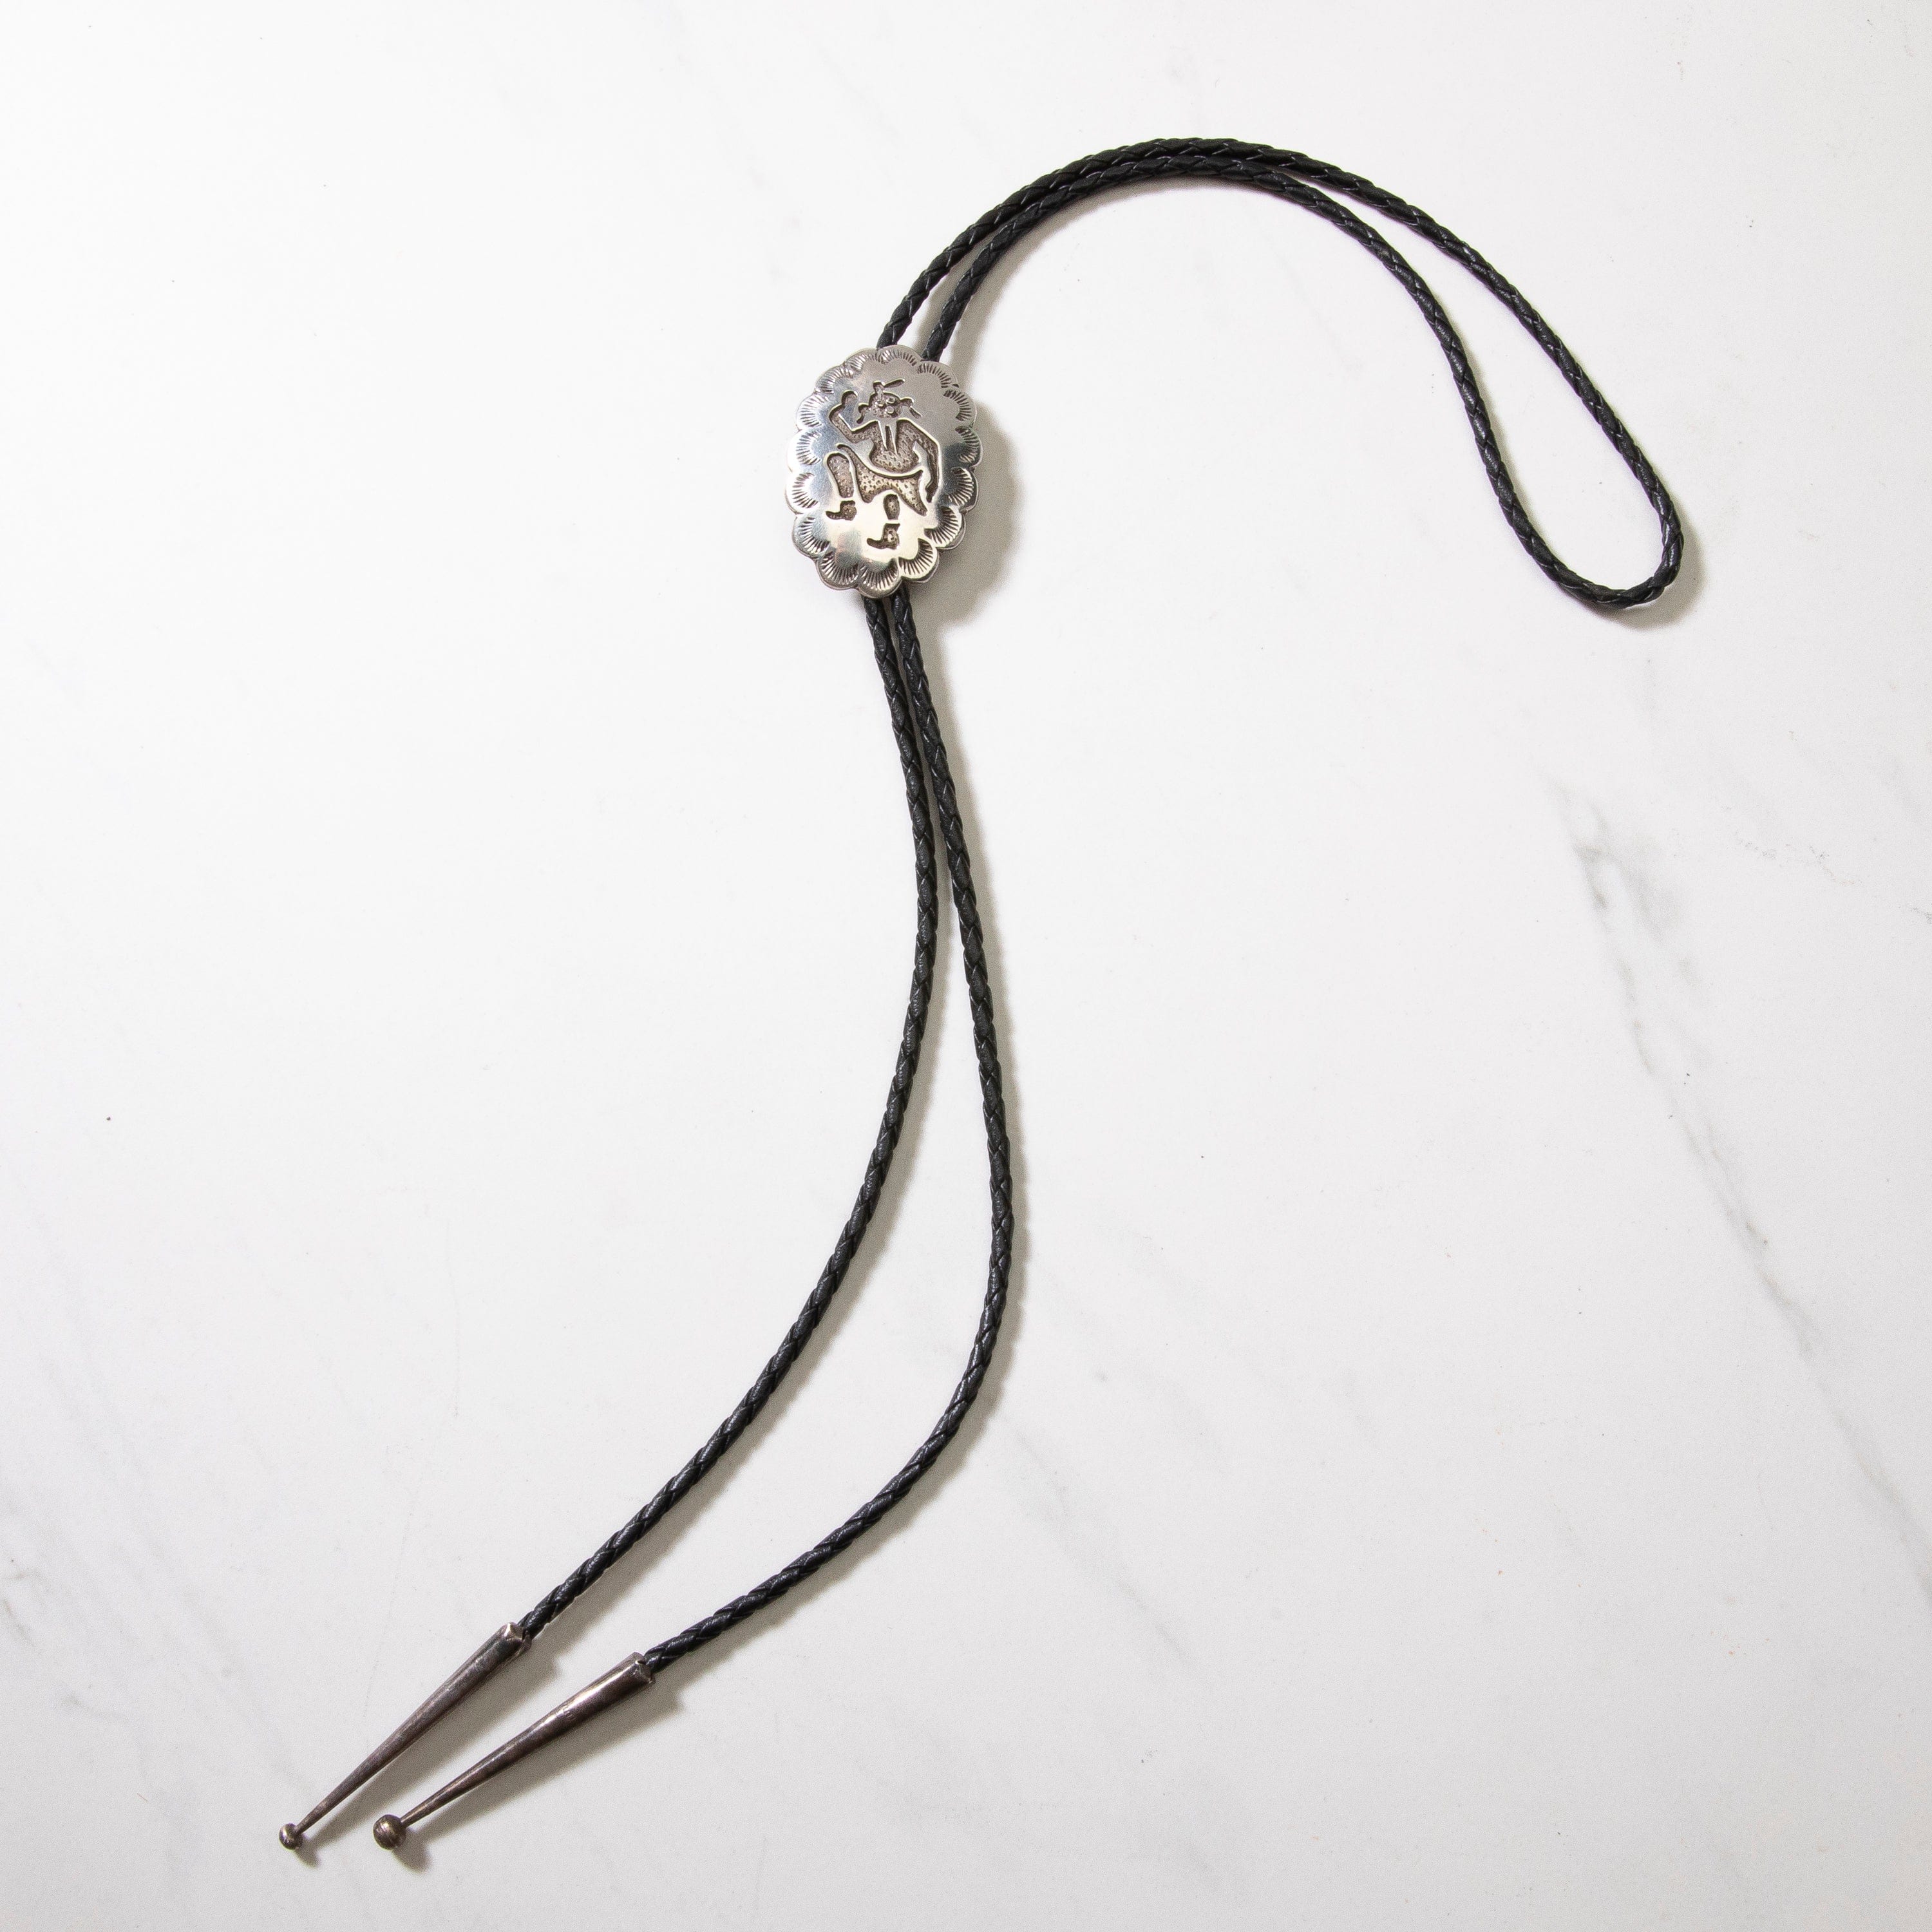 Kalifano Native American Jewelry USA Native American Made 925 Sterling Silver Bolo Tie NABT800.001